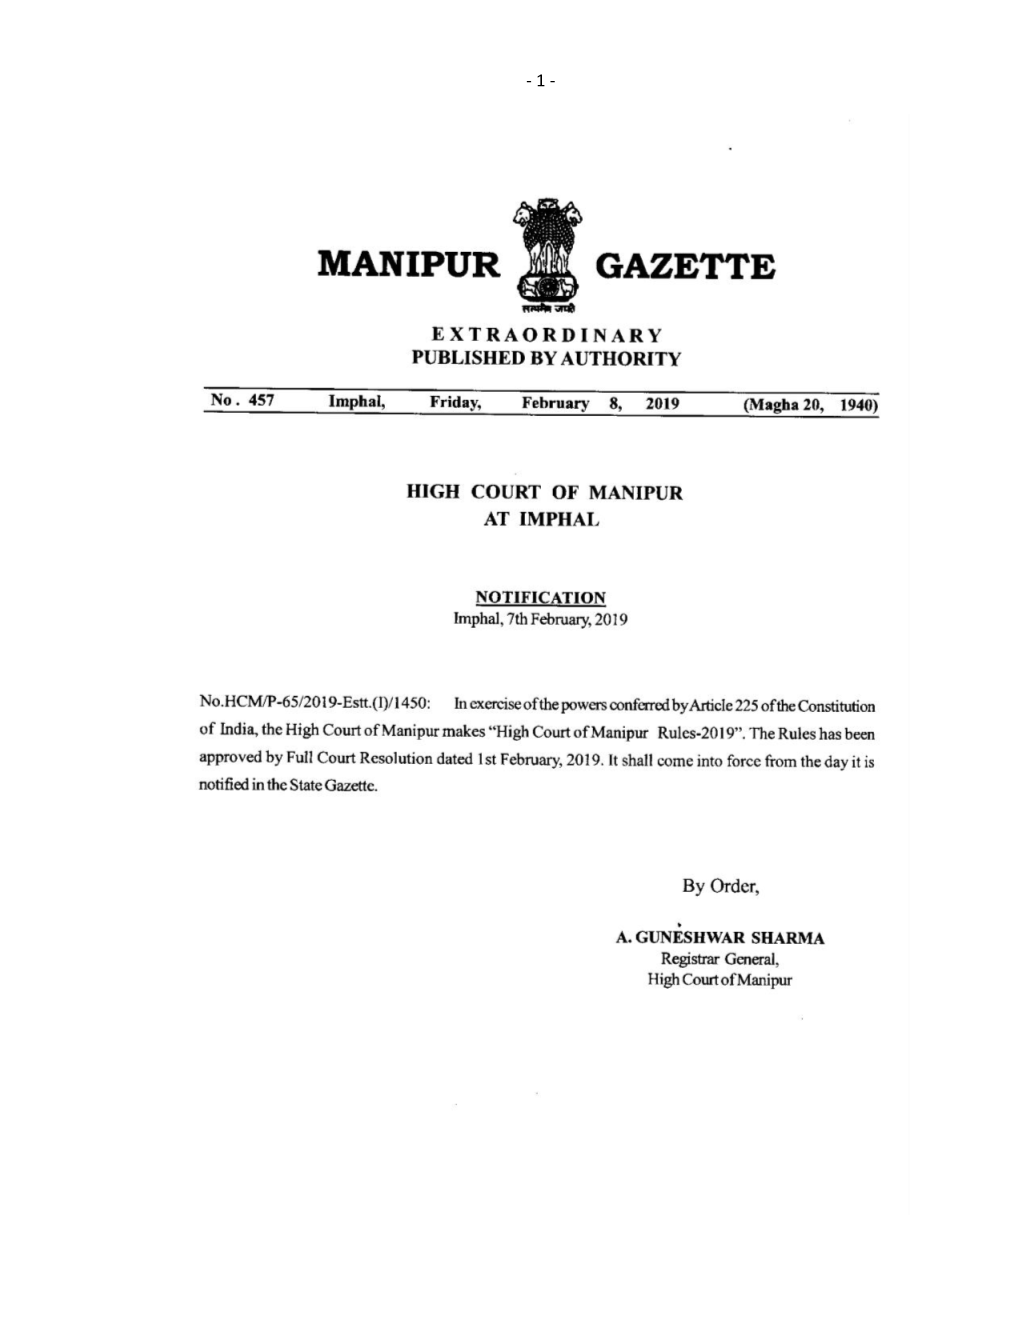 High Court of Manipur Rules, 2019, and High Court of Manipur Civil/Criminal Rules As the Case May Be